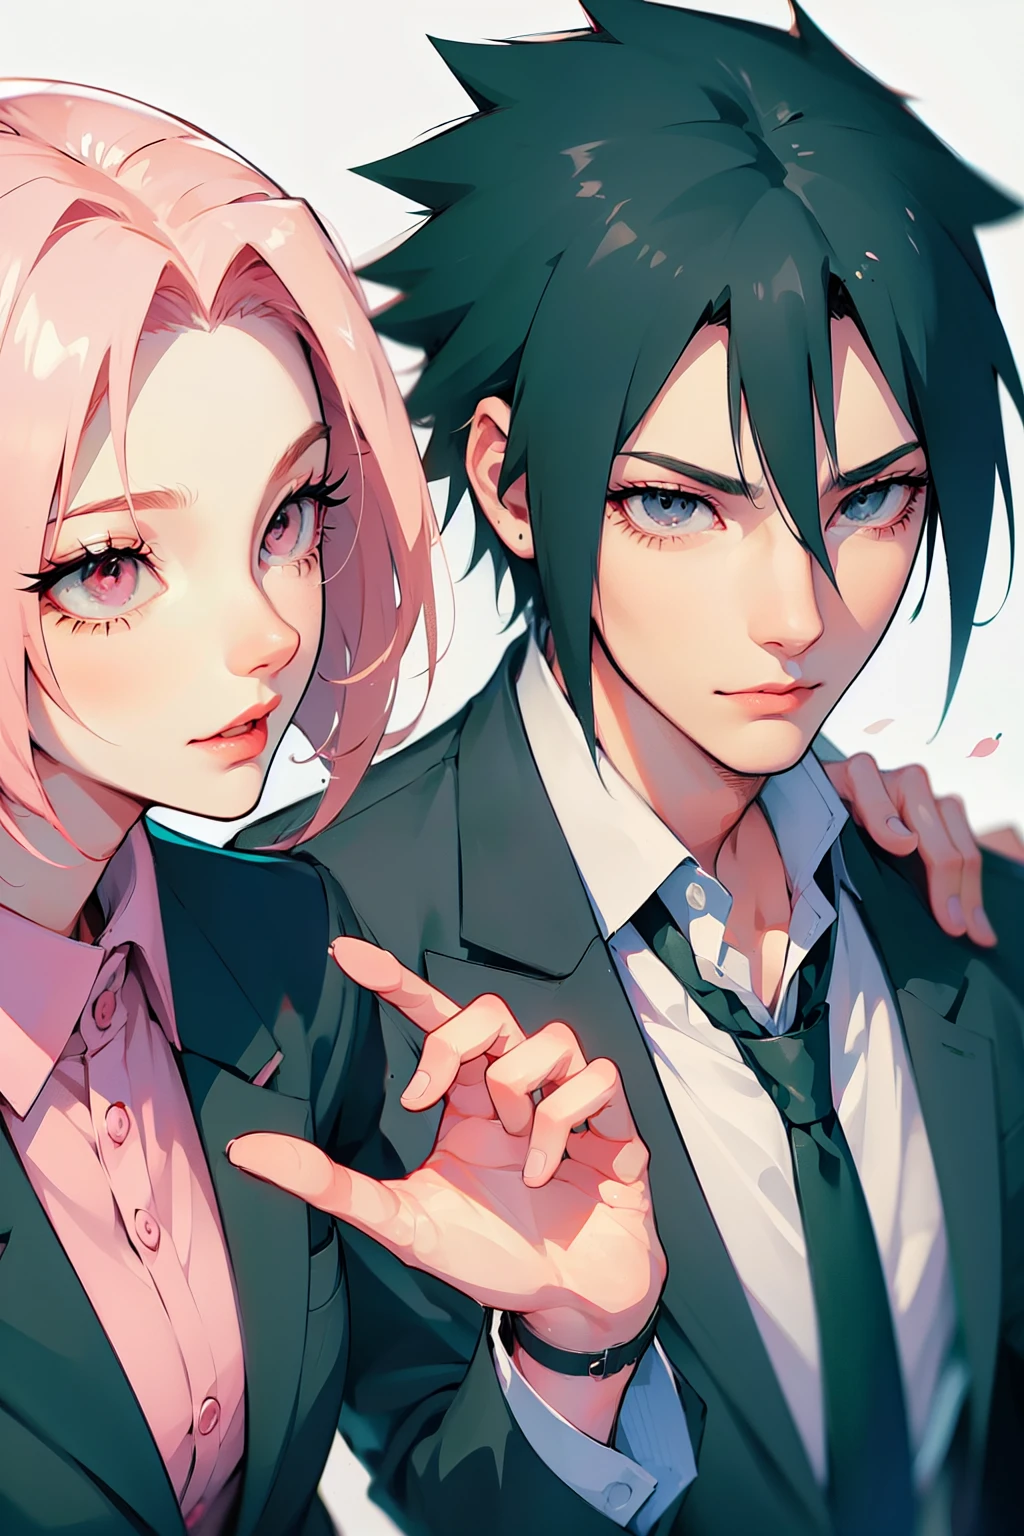 sasusaku. Sasuke Uchiha, a tall man with black hair and wearing a black suit, is a rich businessman with his hands in his pockets. Sakura, a thin woman with pink hair, short hair, secretary. are in the elevator. best quality, adorable, ultra-detailed, illustration, shadows, attraction. complex, detailed, extremely detailed, detailed face, soft light, soft focus, perfect face. In love, illustration. two people, couple, ART ILLUSTRATION